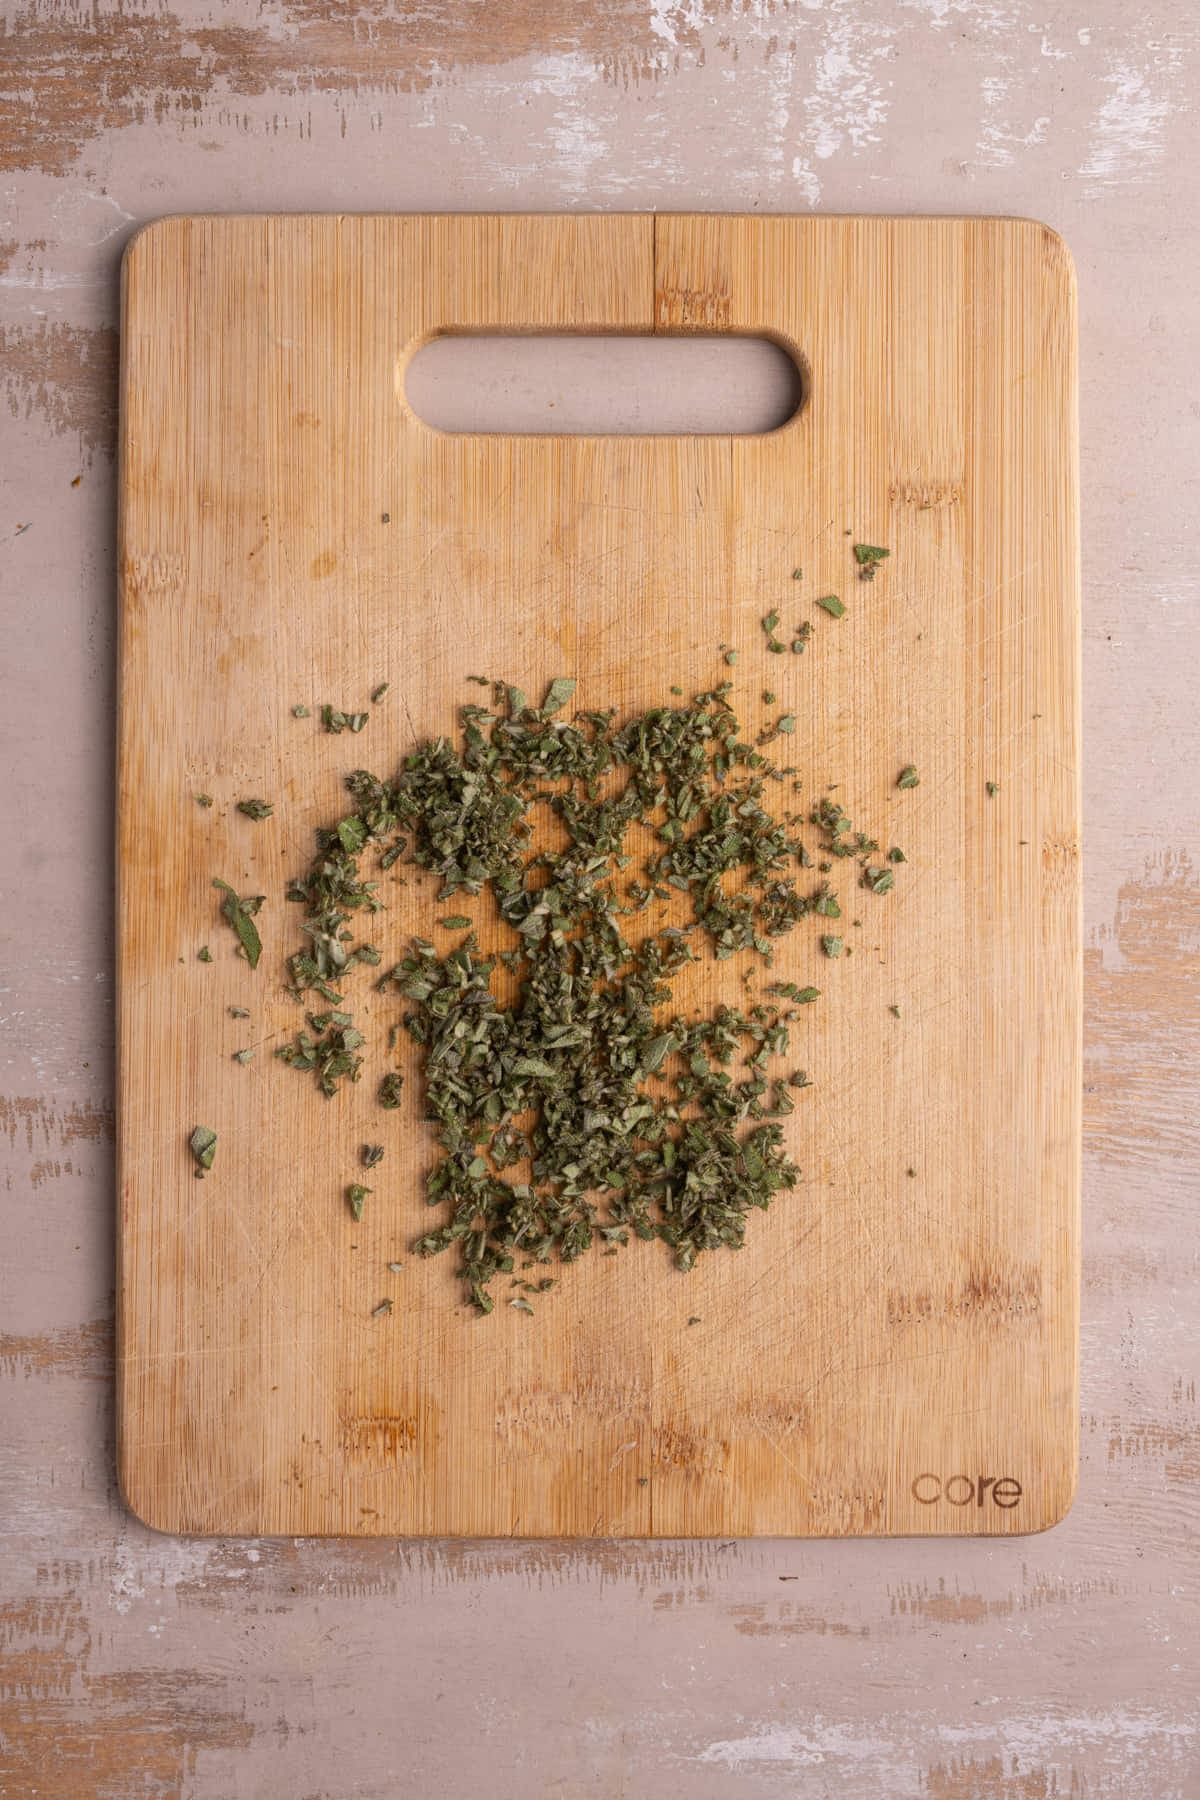 Diced rosemary on a chopping board